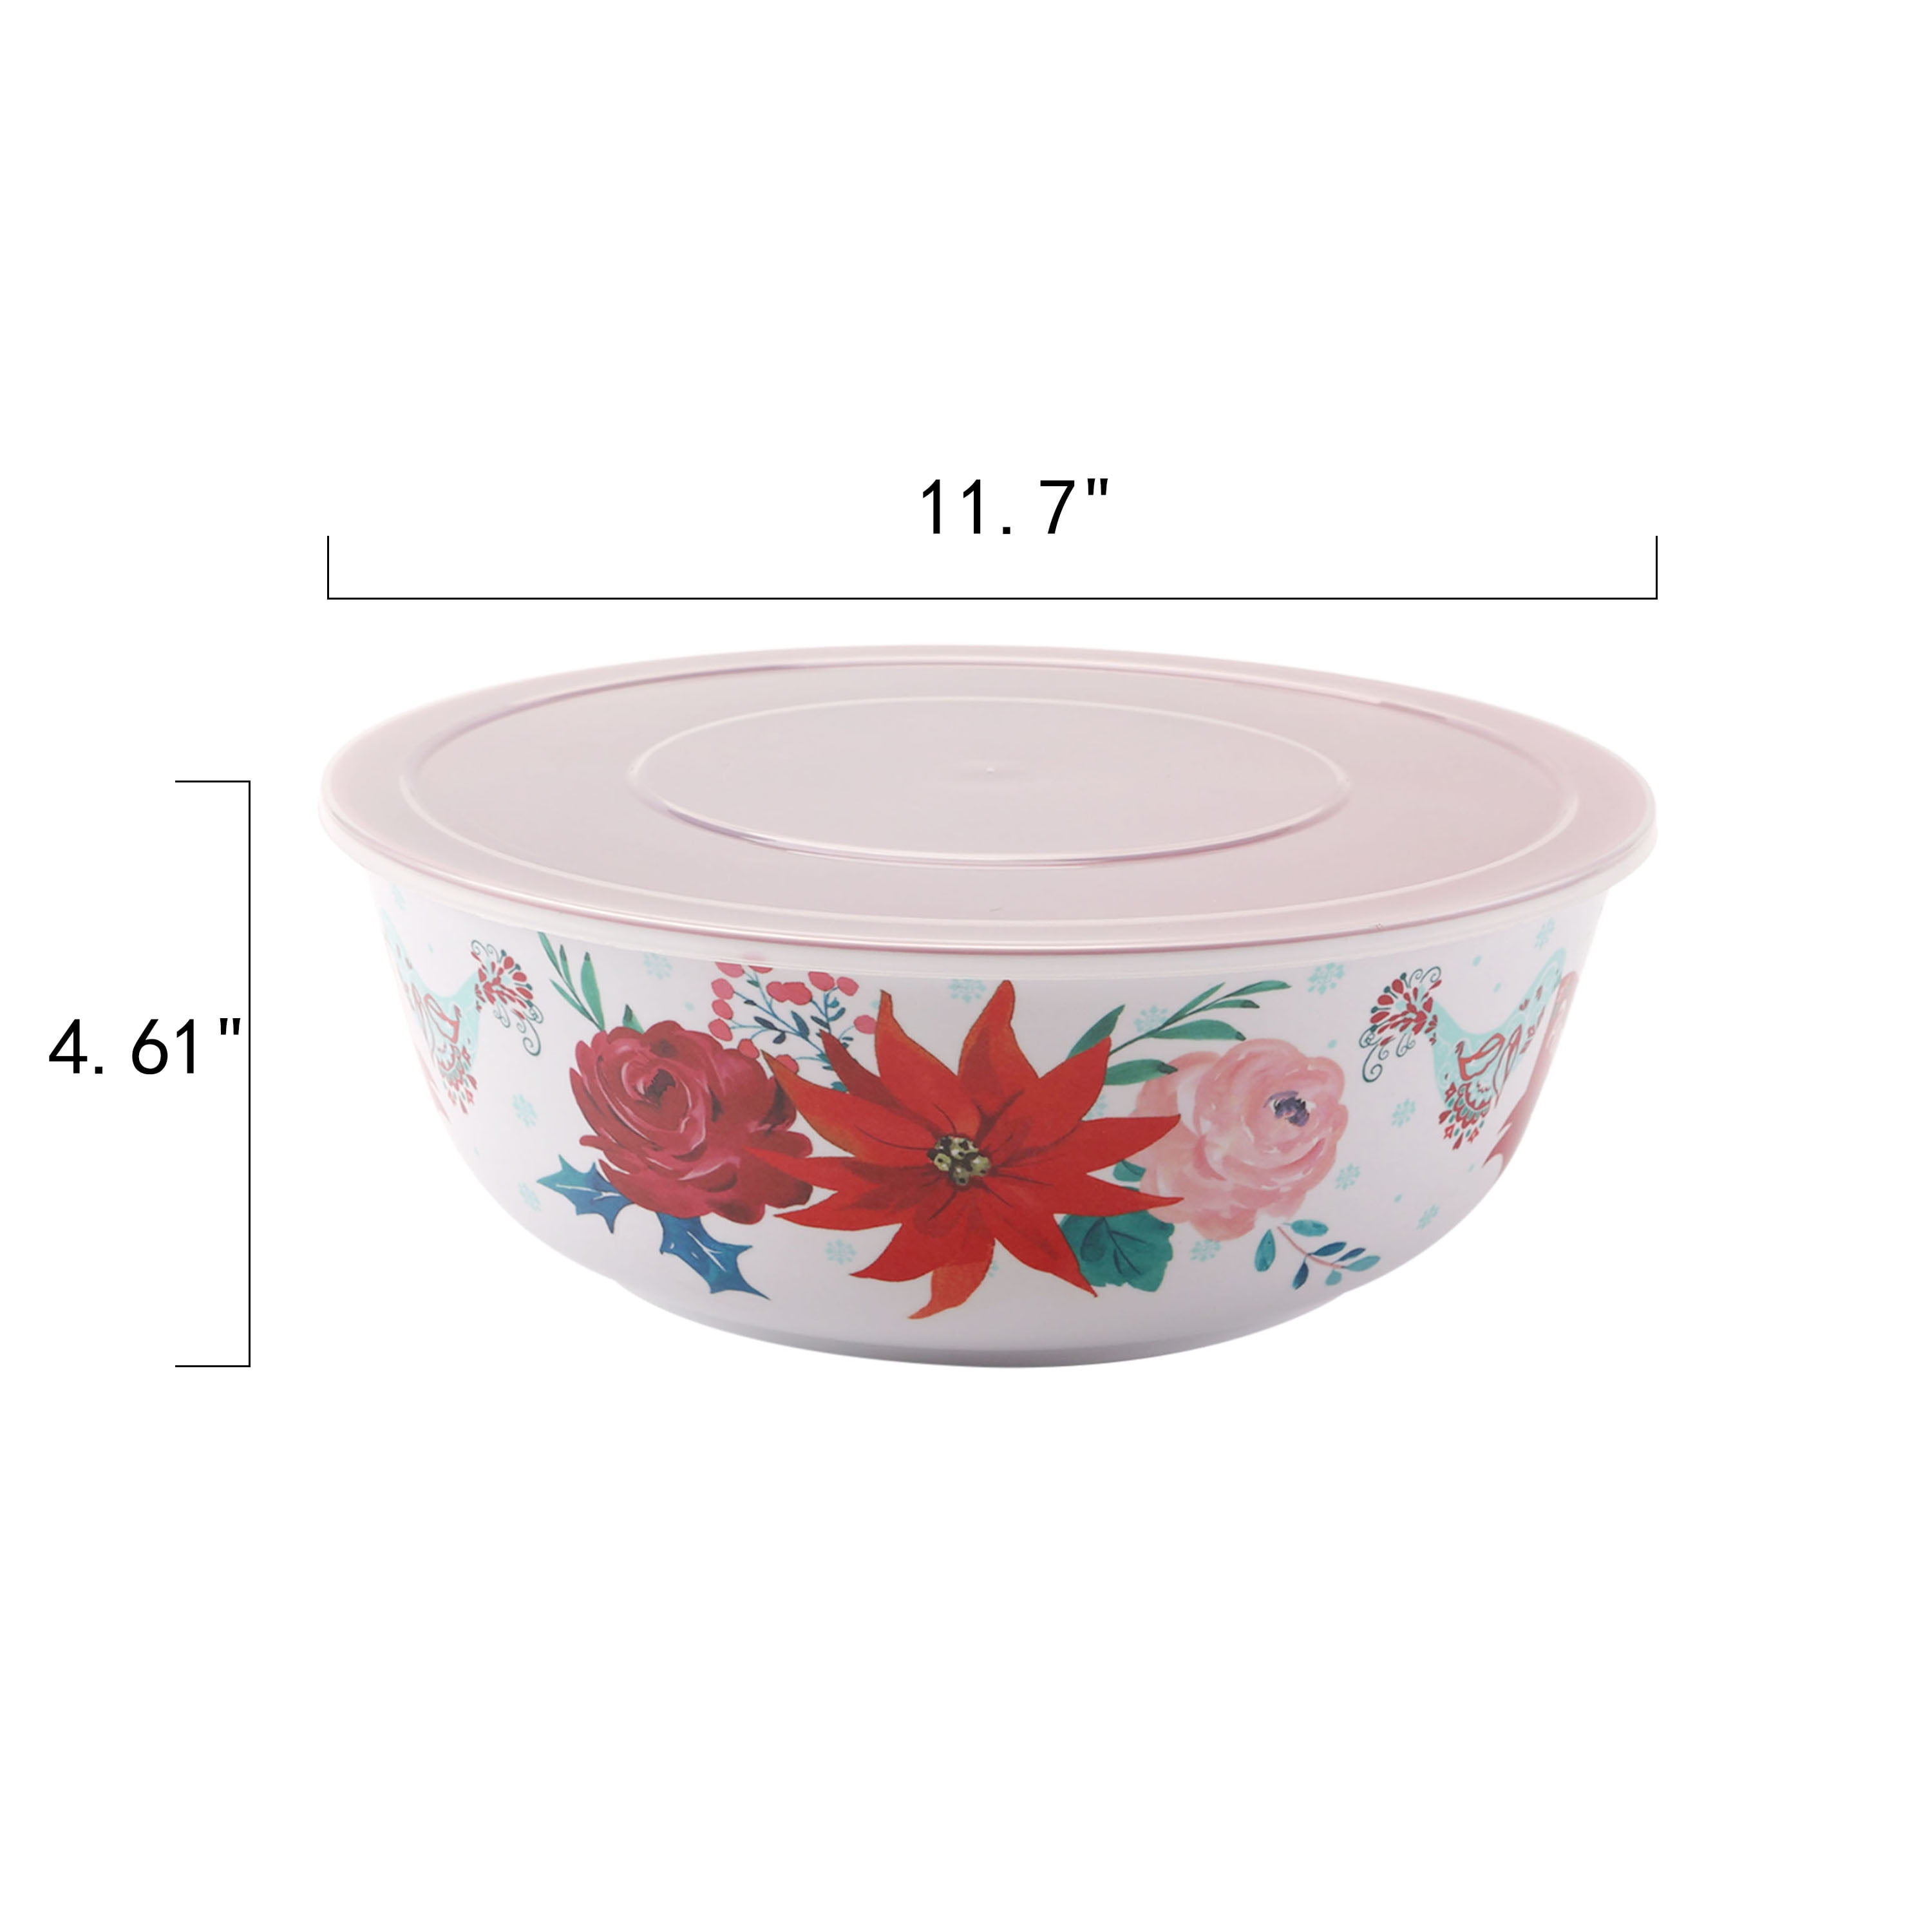  The Pioneer Woman Mazie 6-Piece Round Ceramic Nesting Bowl Set  with Build-In Steam Release,15.5 ounce : Home & Kitchen